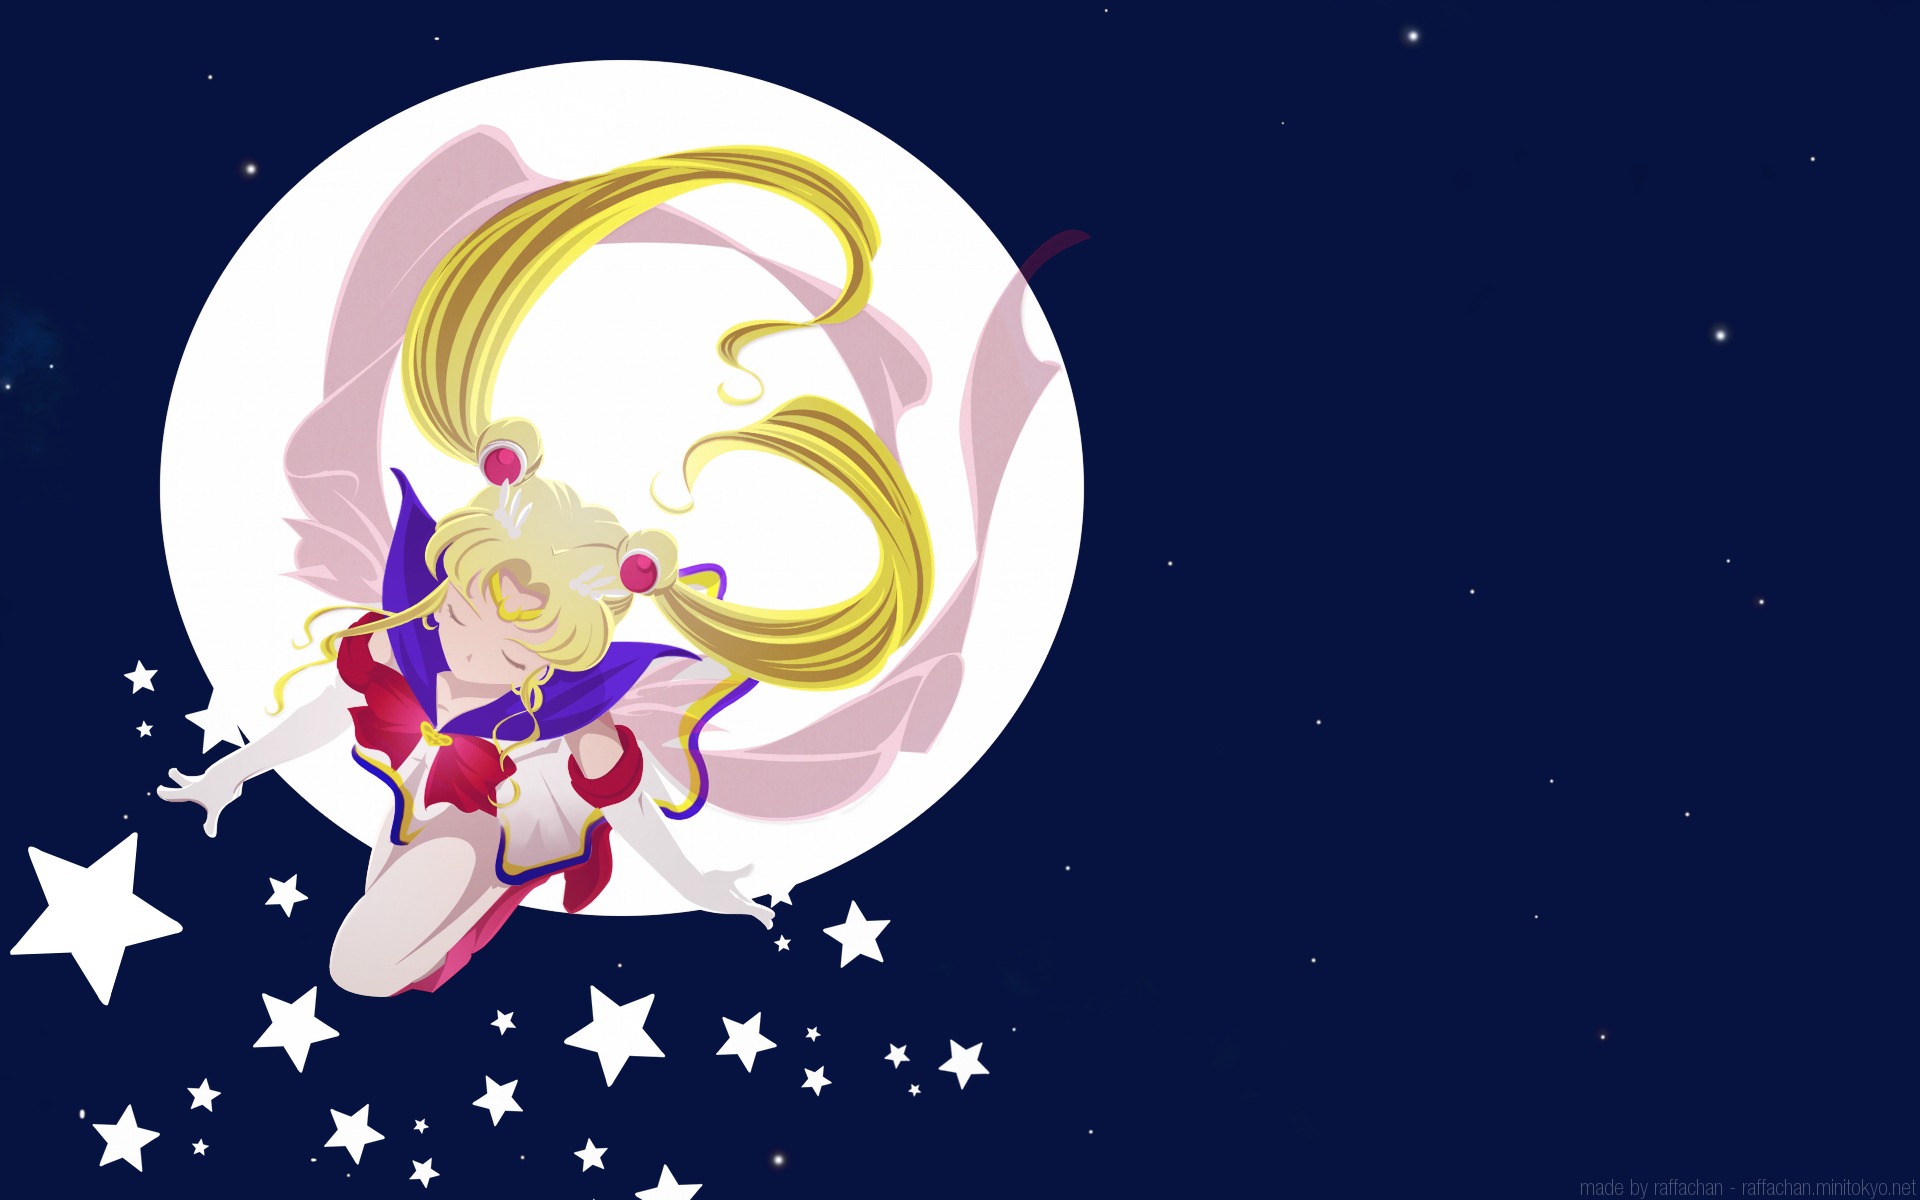 Sailor Moon Wallpapers and Background Images - stmed.net